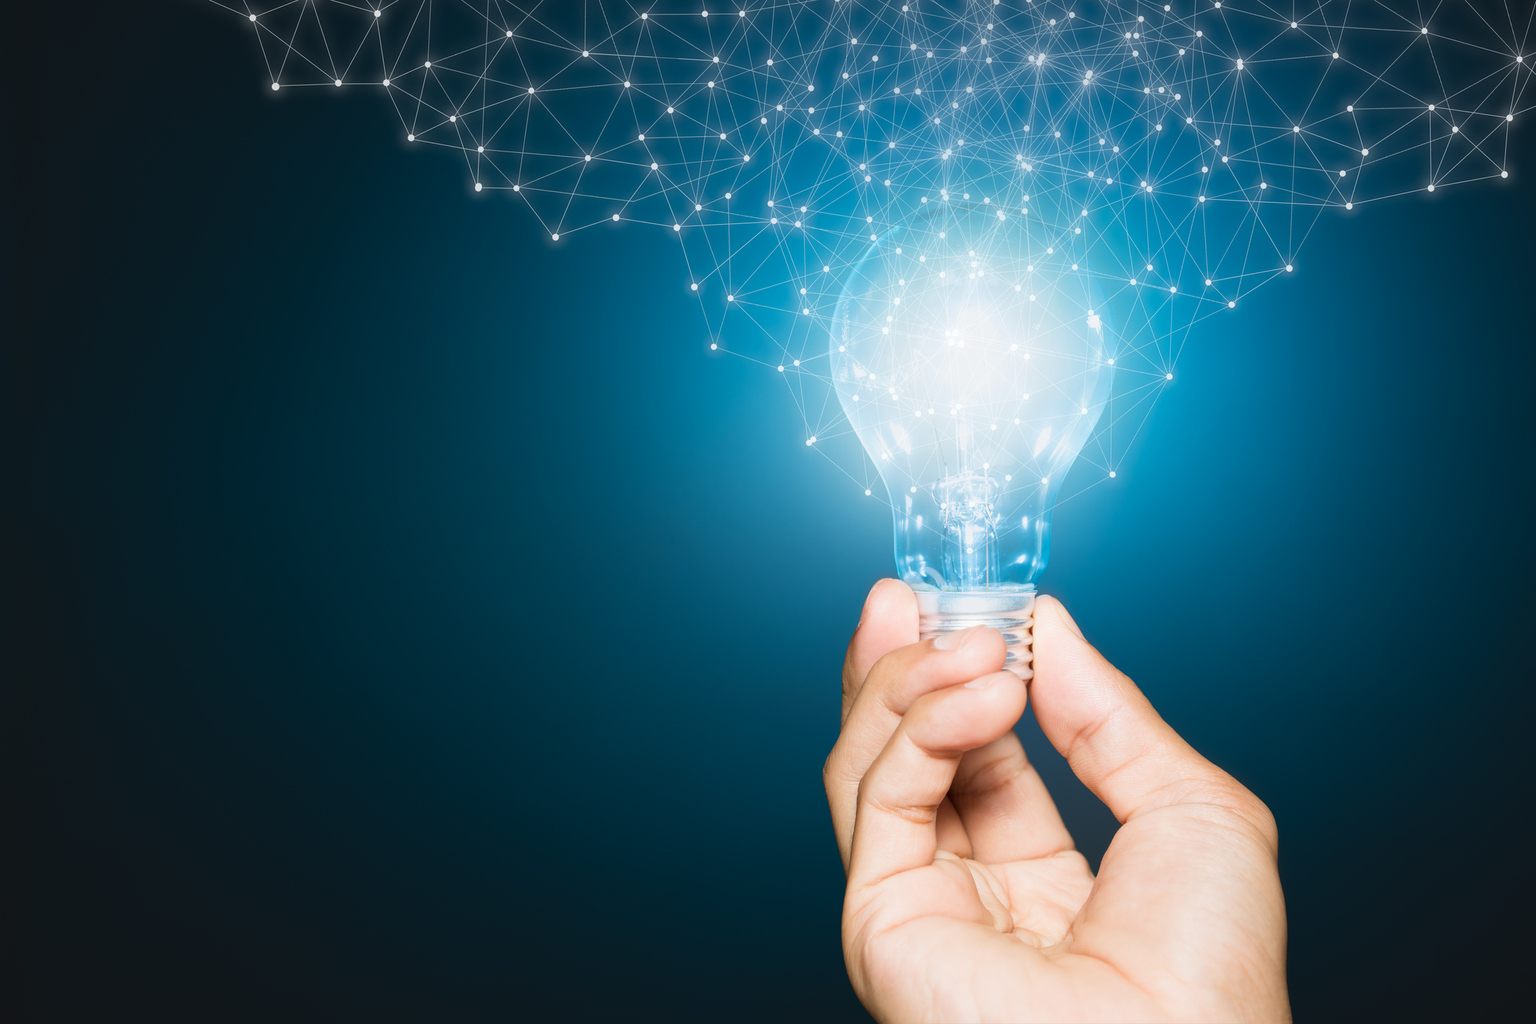 Light up your insights: A clinical terminology strategy for trustworthy analytics